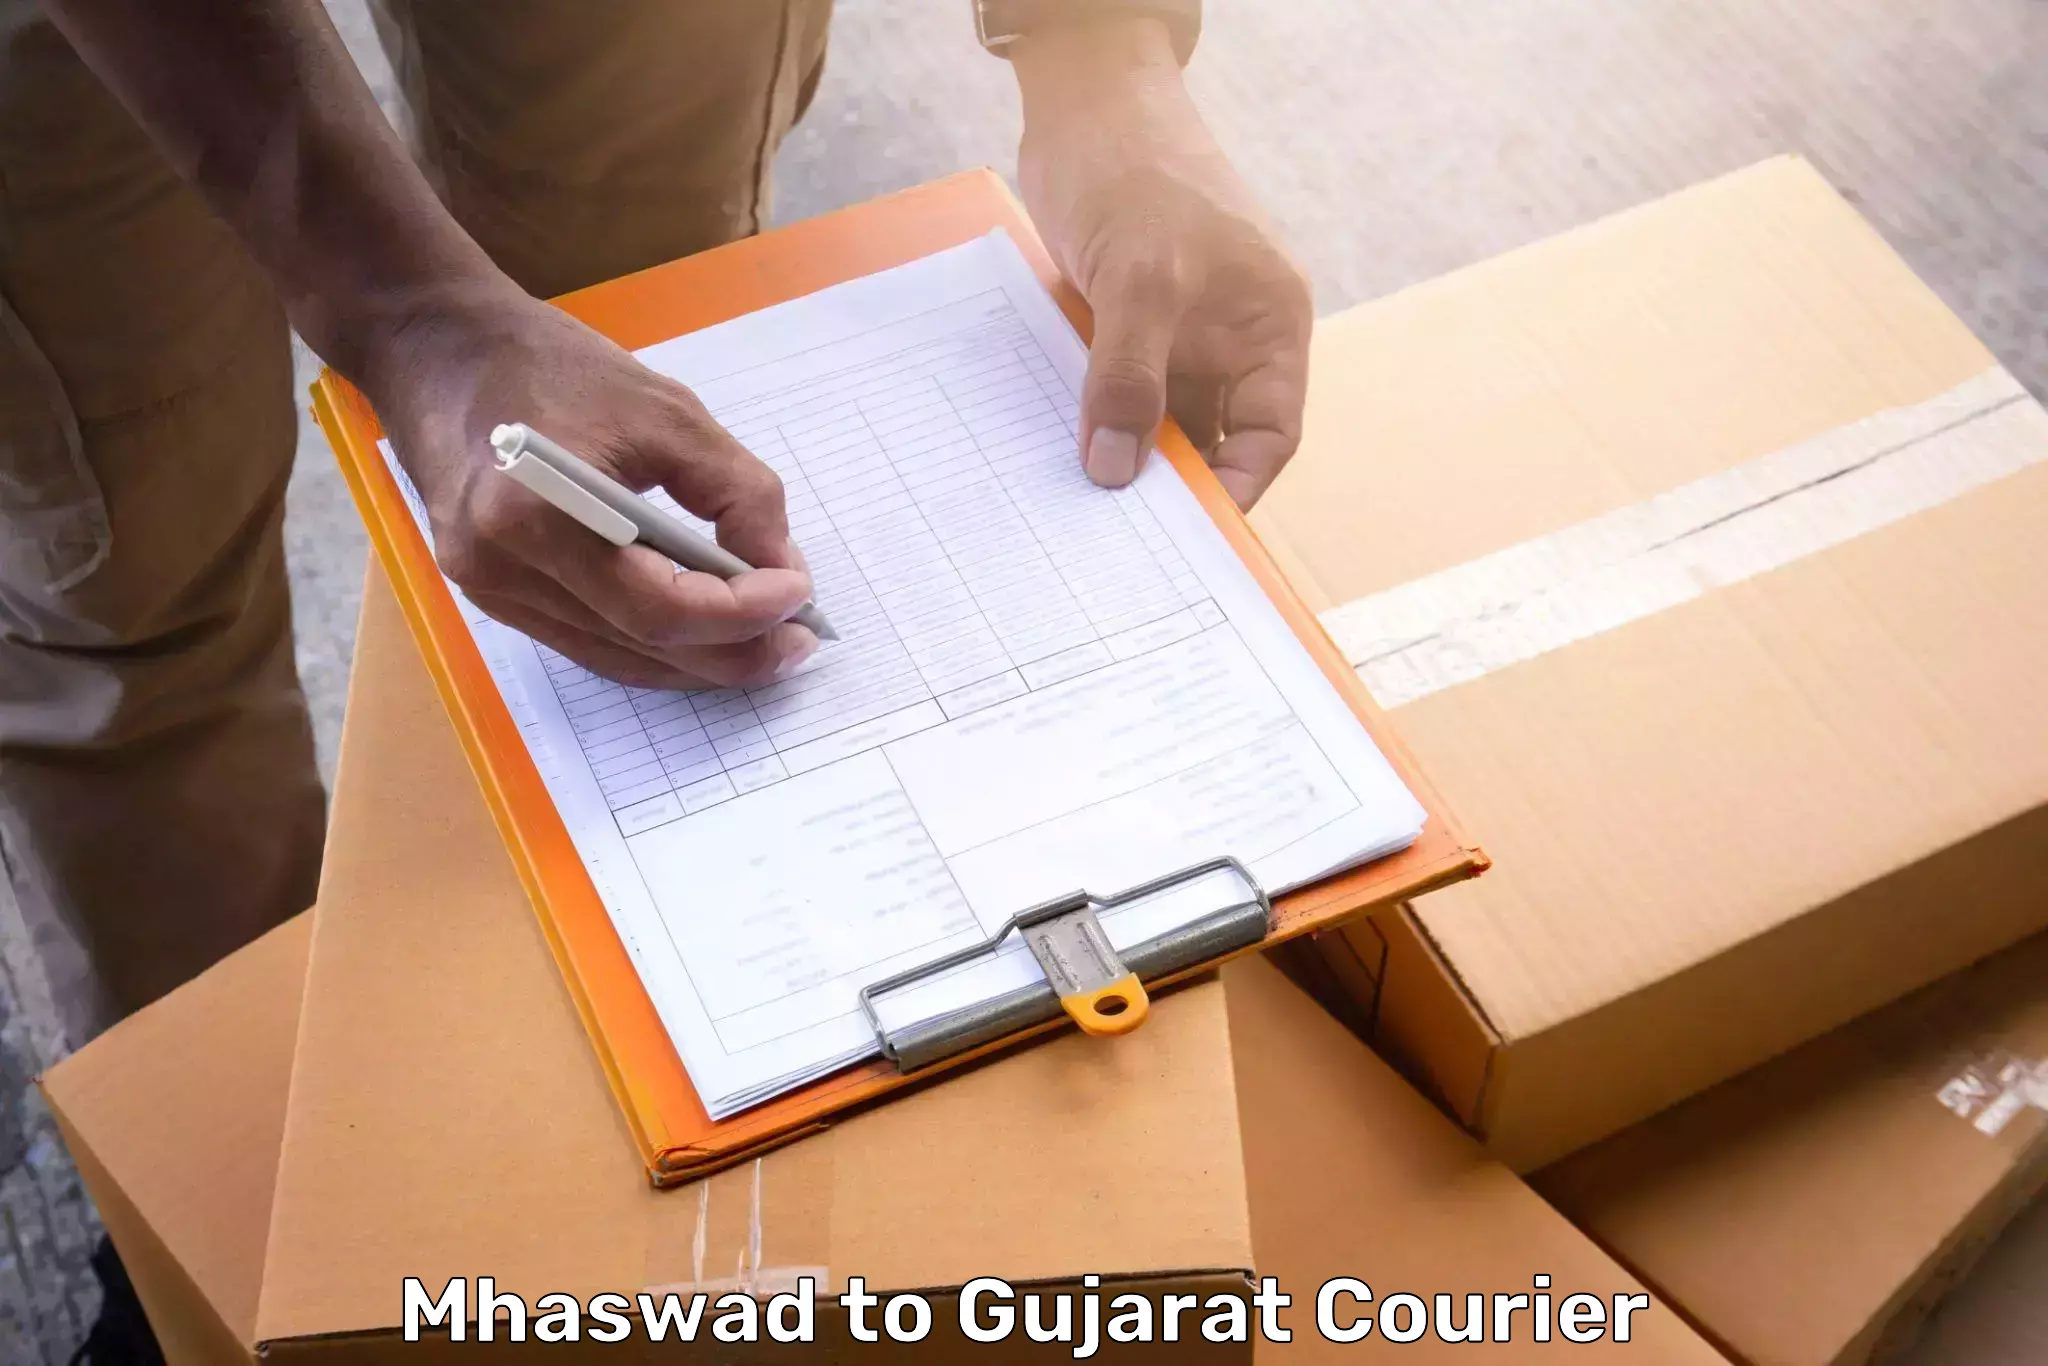 Online luggage shipping booking Mhaswad to Ahmedabad